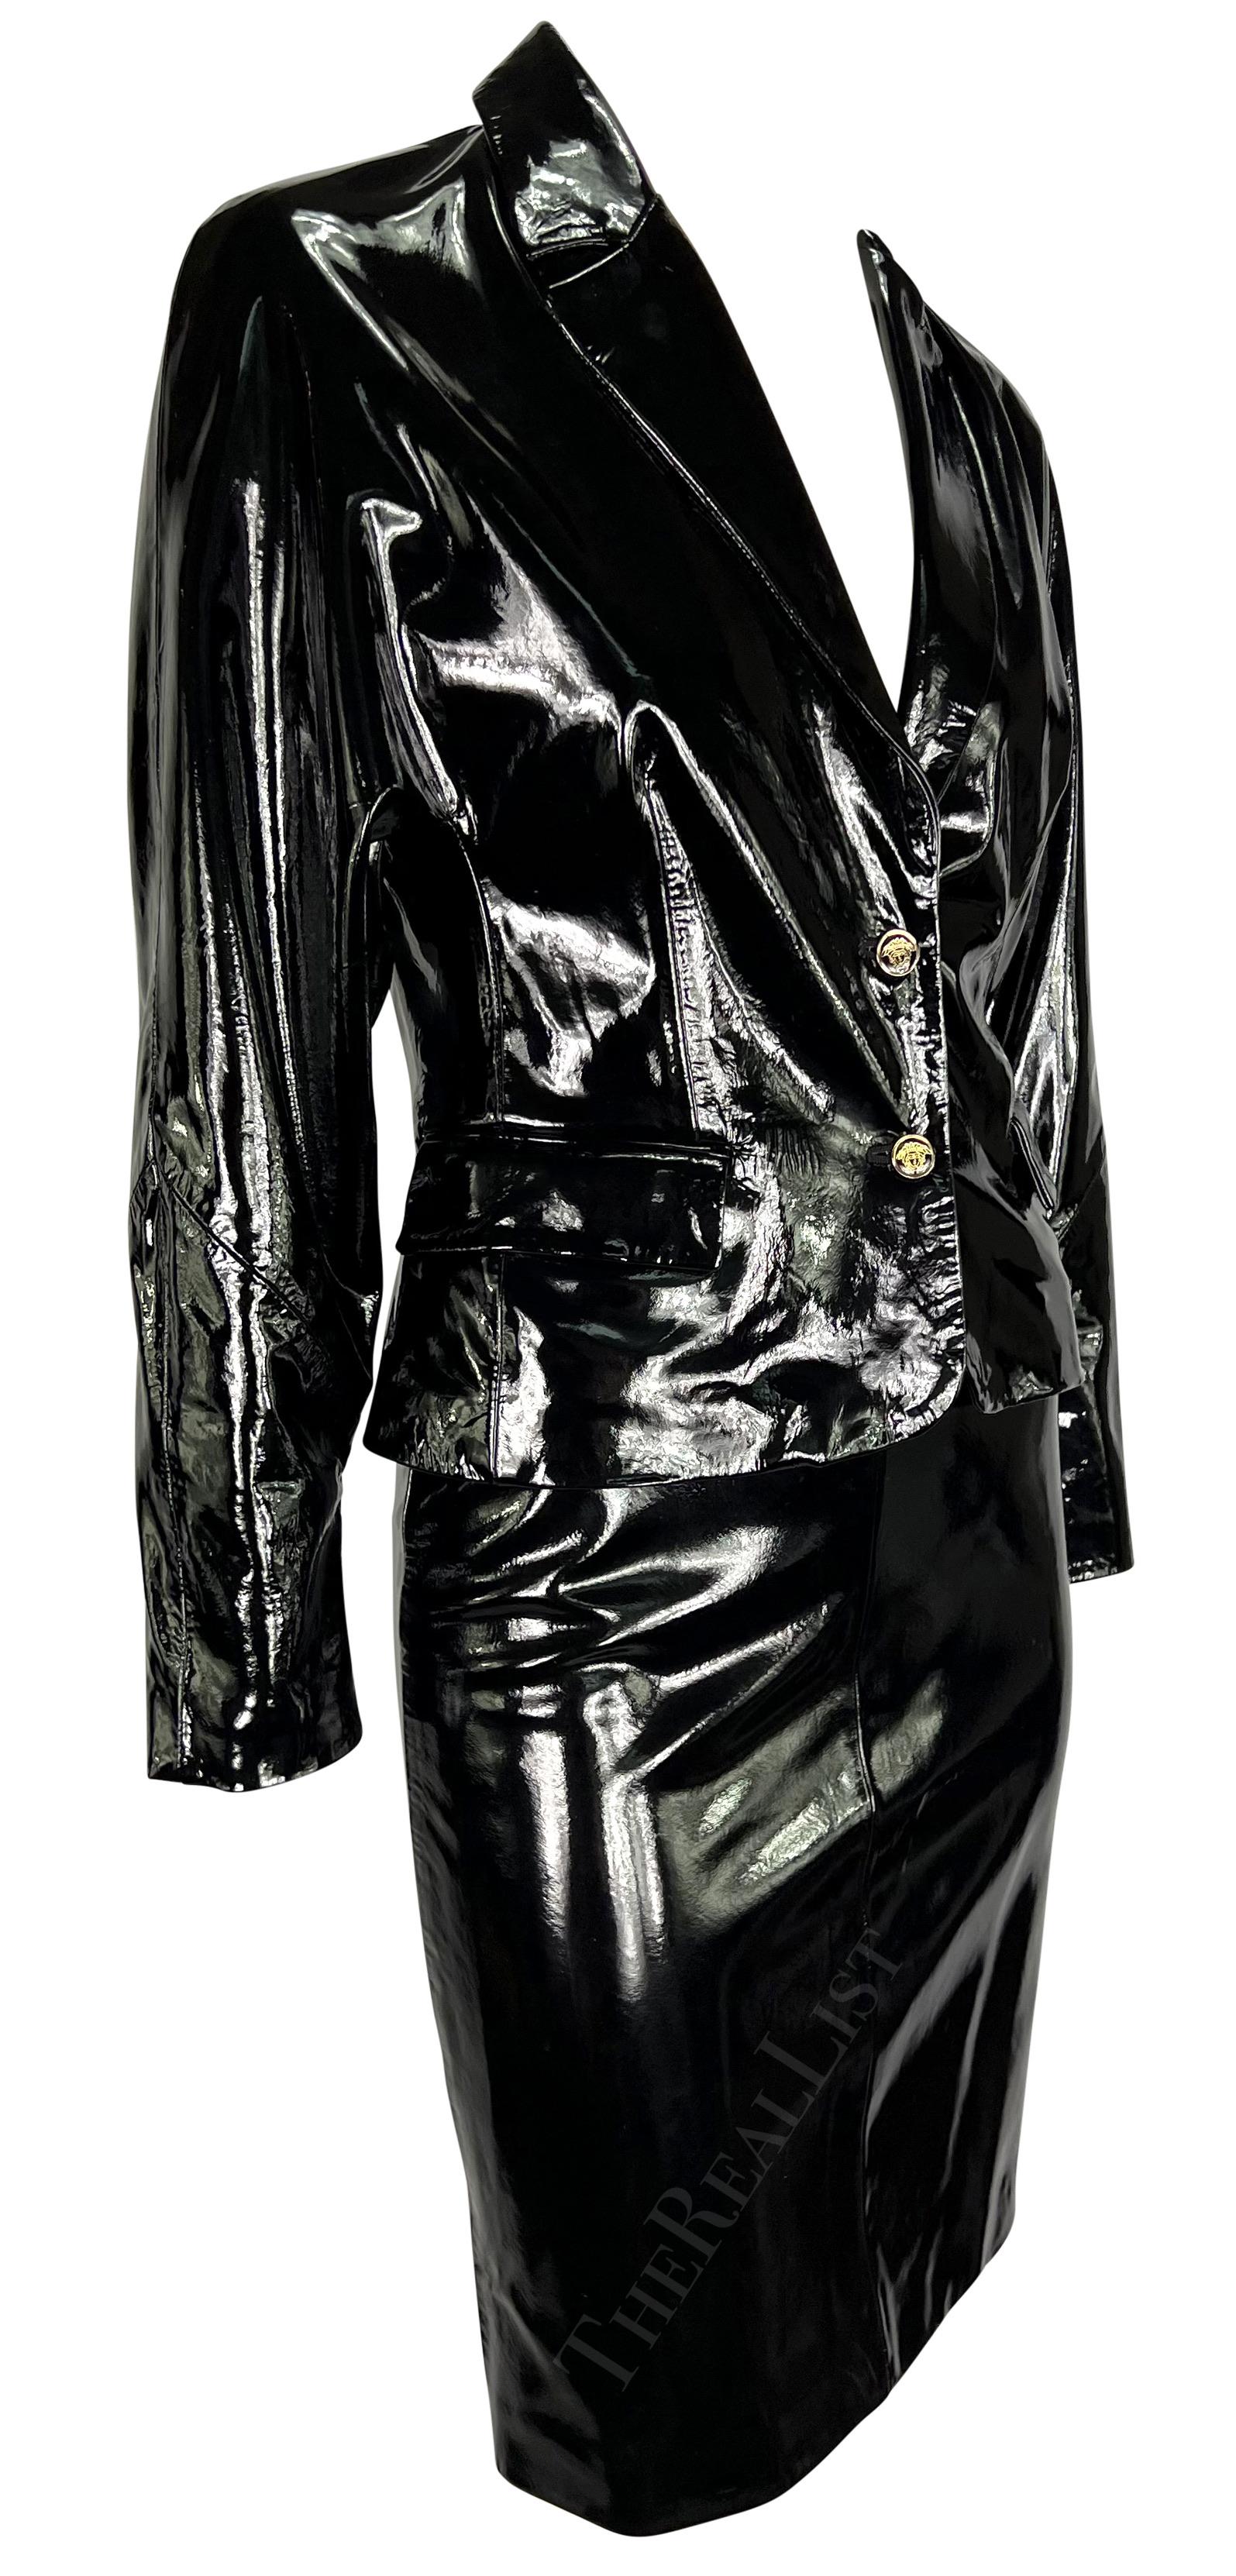 S/S 2001 Gianni Versace by Dontella Runway Black Patent Leather Moto Skirt Suit  8